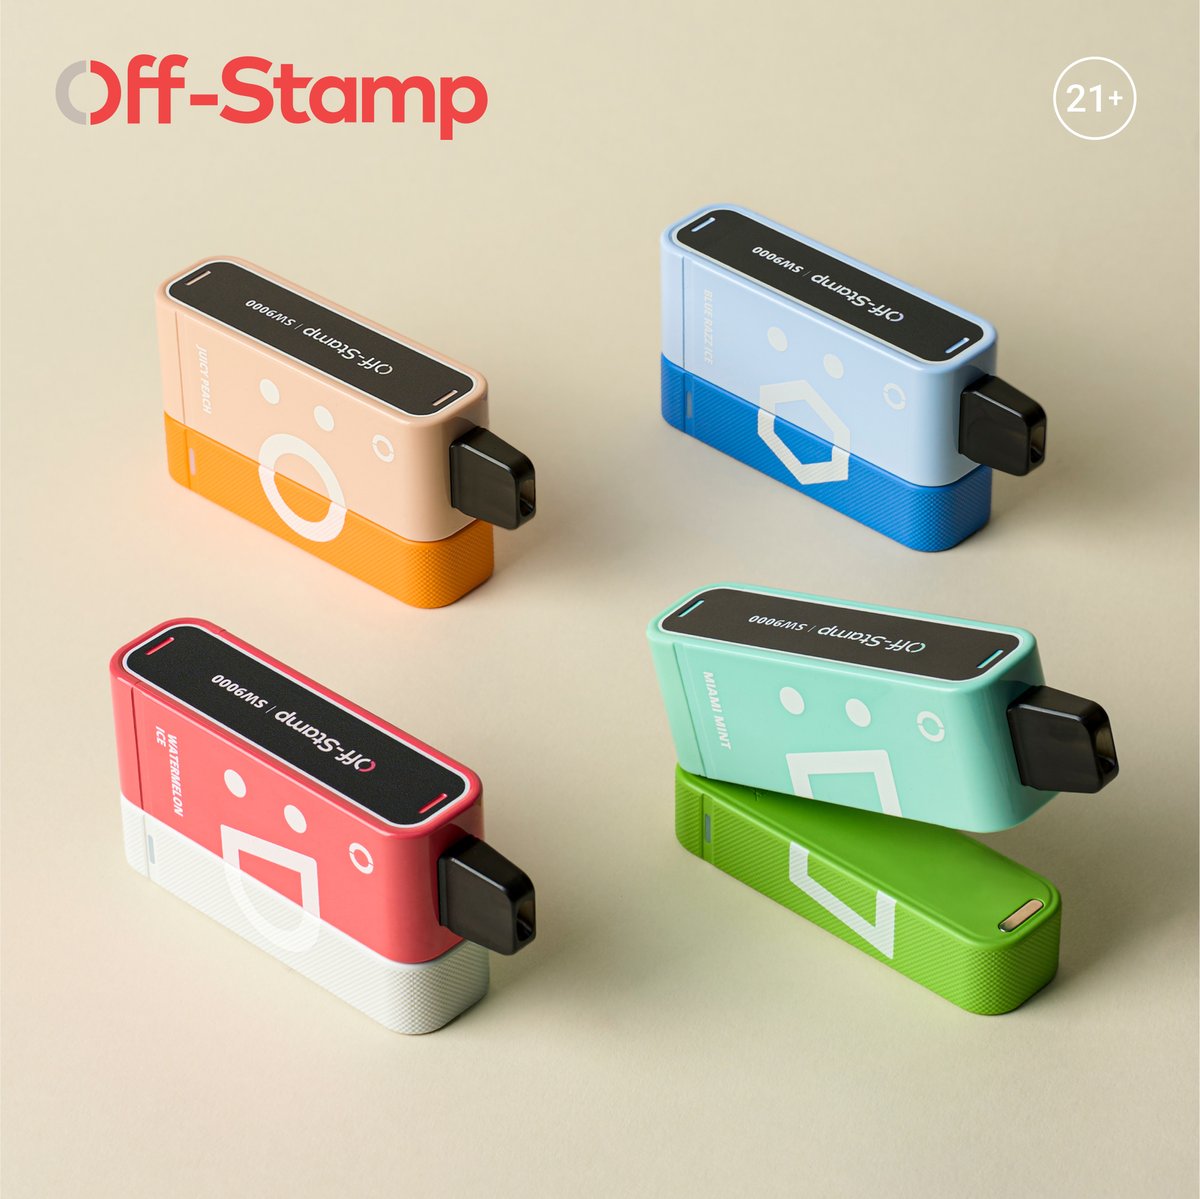 Unlock the magic, just click it! Off-Stamp's got the flavors, come and pick it. Vape sensation that'll make you tick, ignite your senses, let your worries flick. 🌬️💨 #OffStamp #ClickItAndSavor #VapeWithFlavor